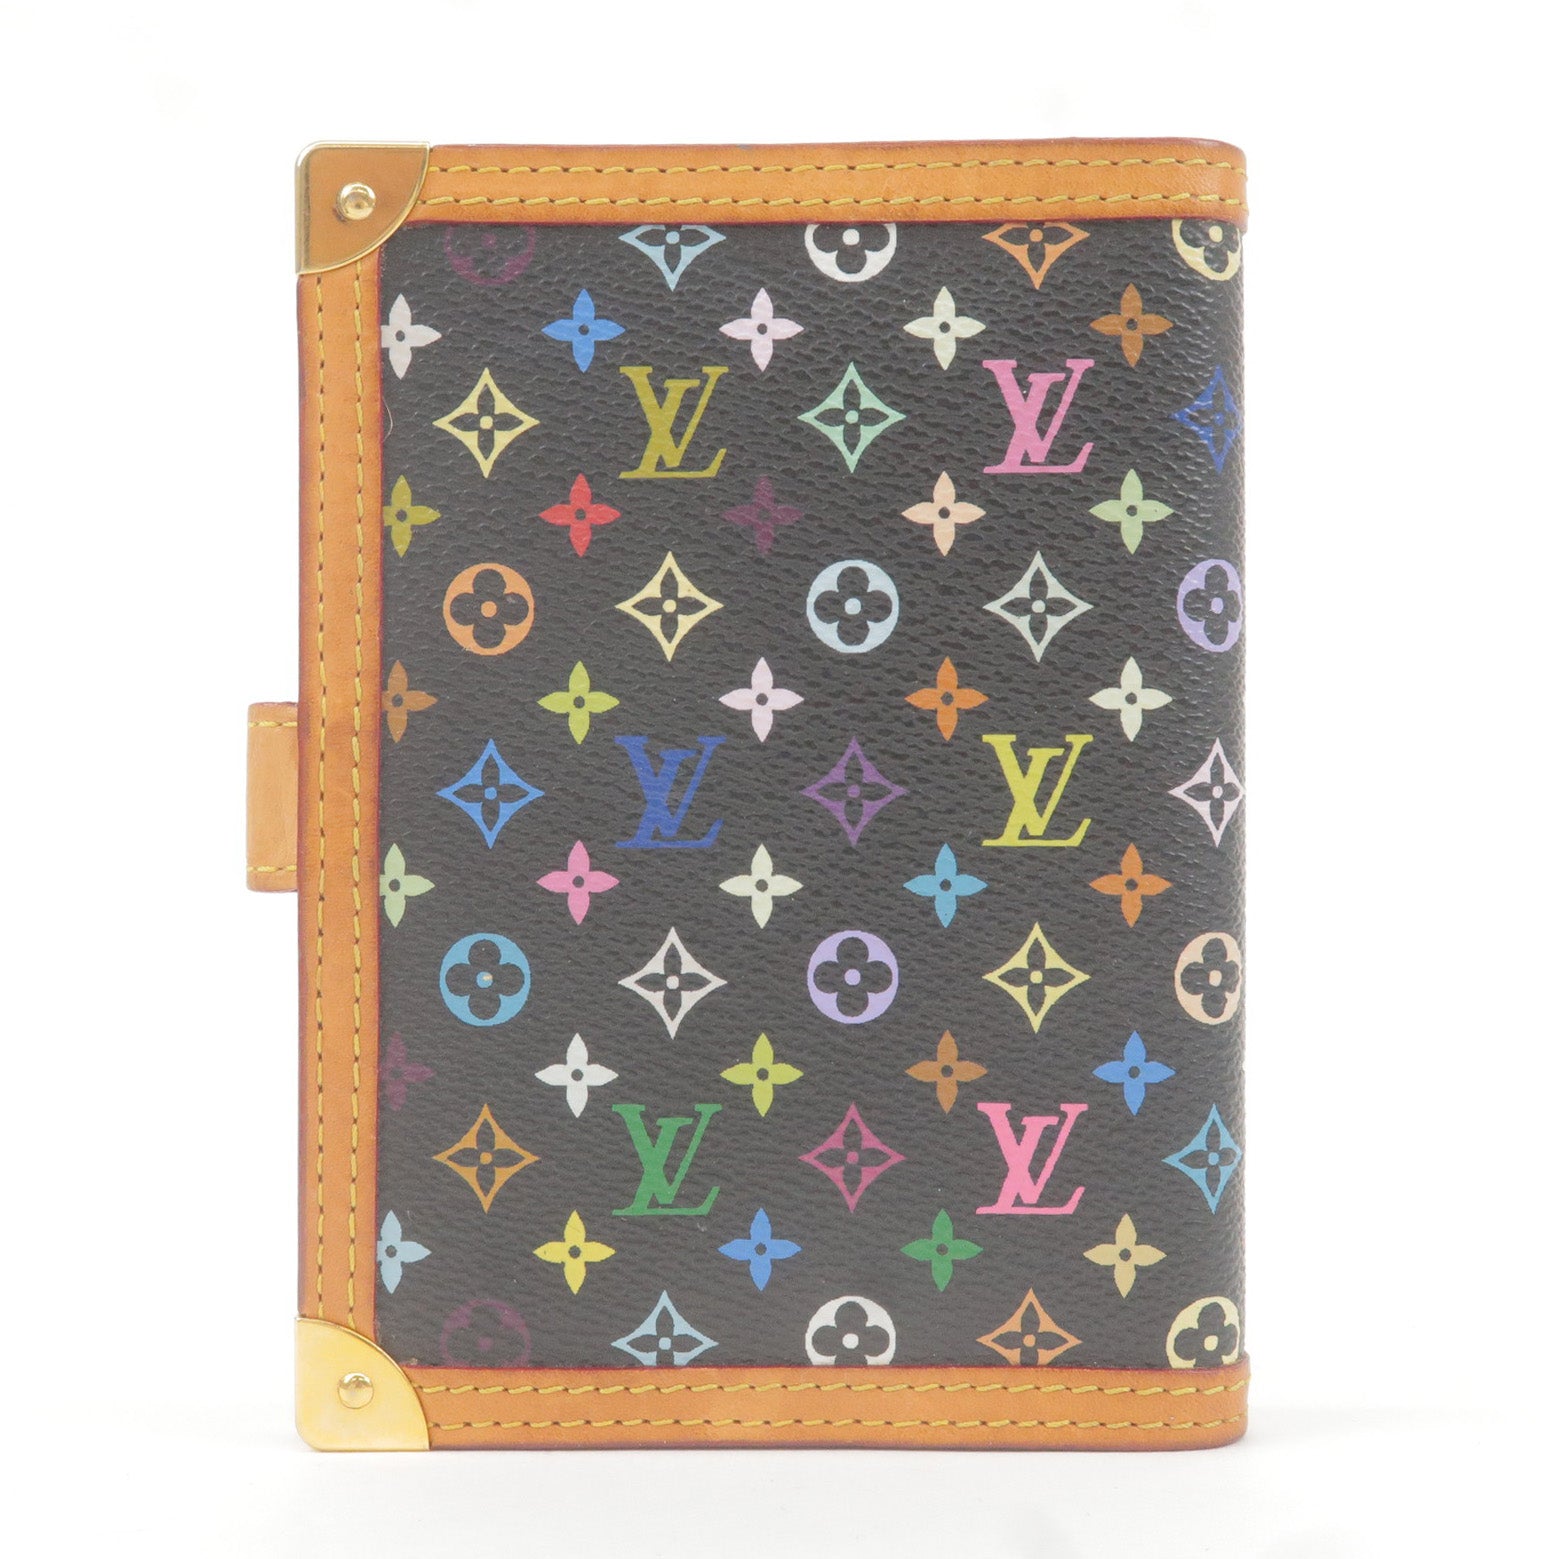 Louis Vuitton Small Ring Agenda/Planner- Review 